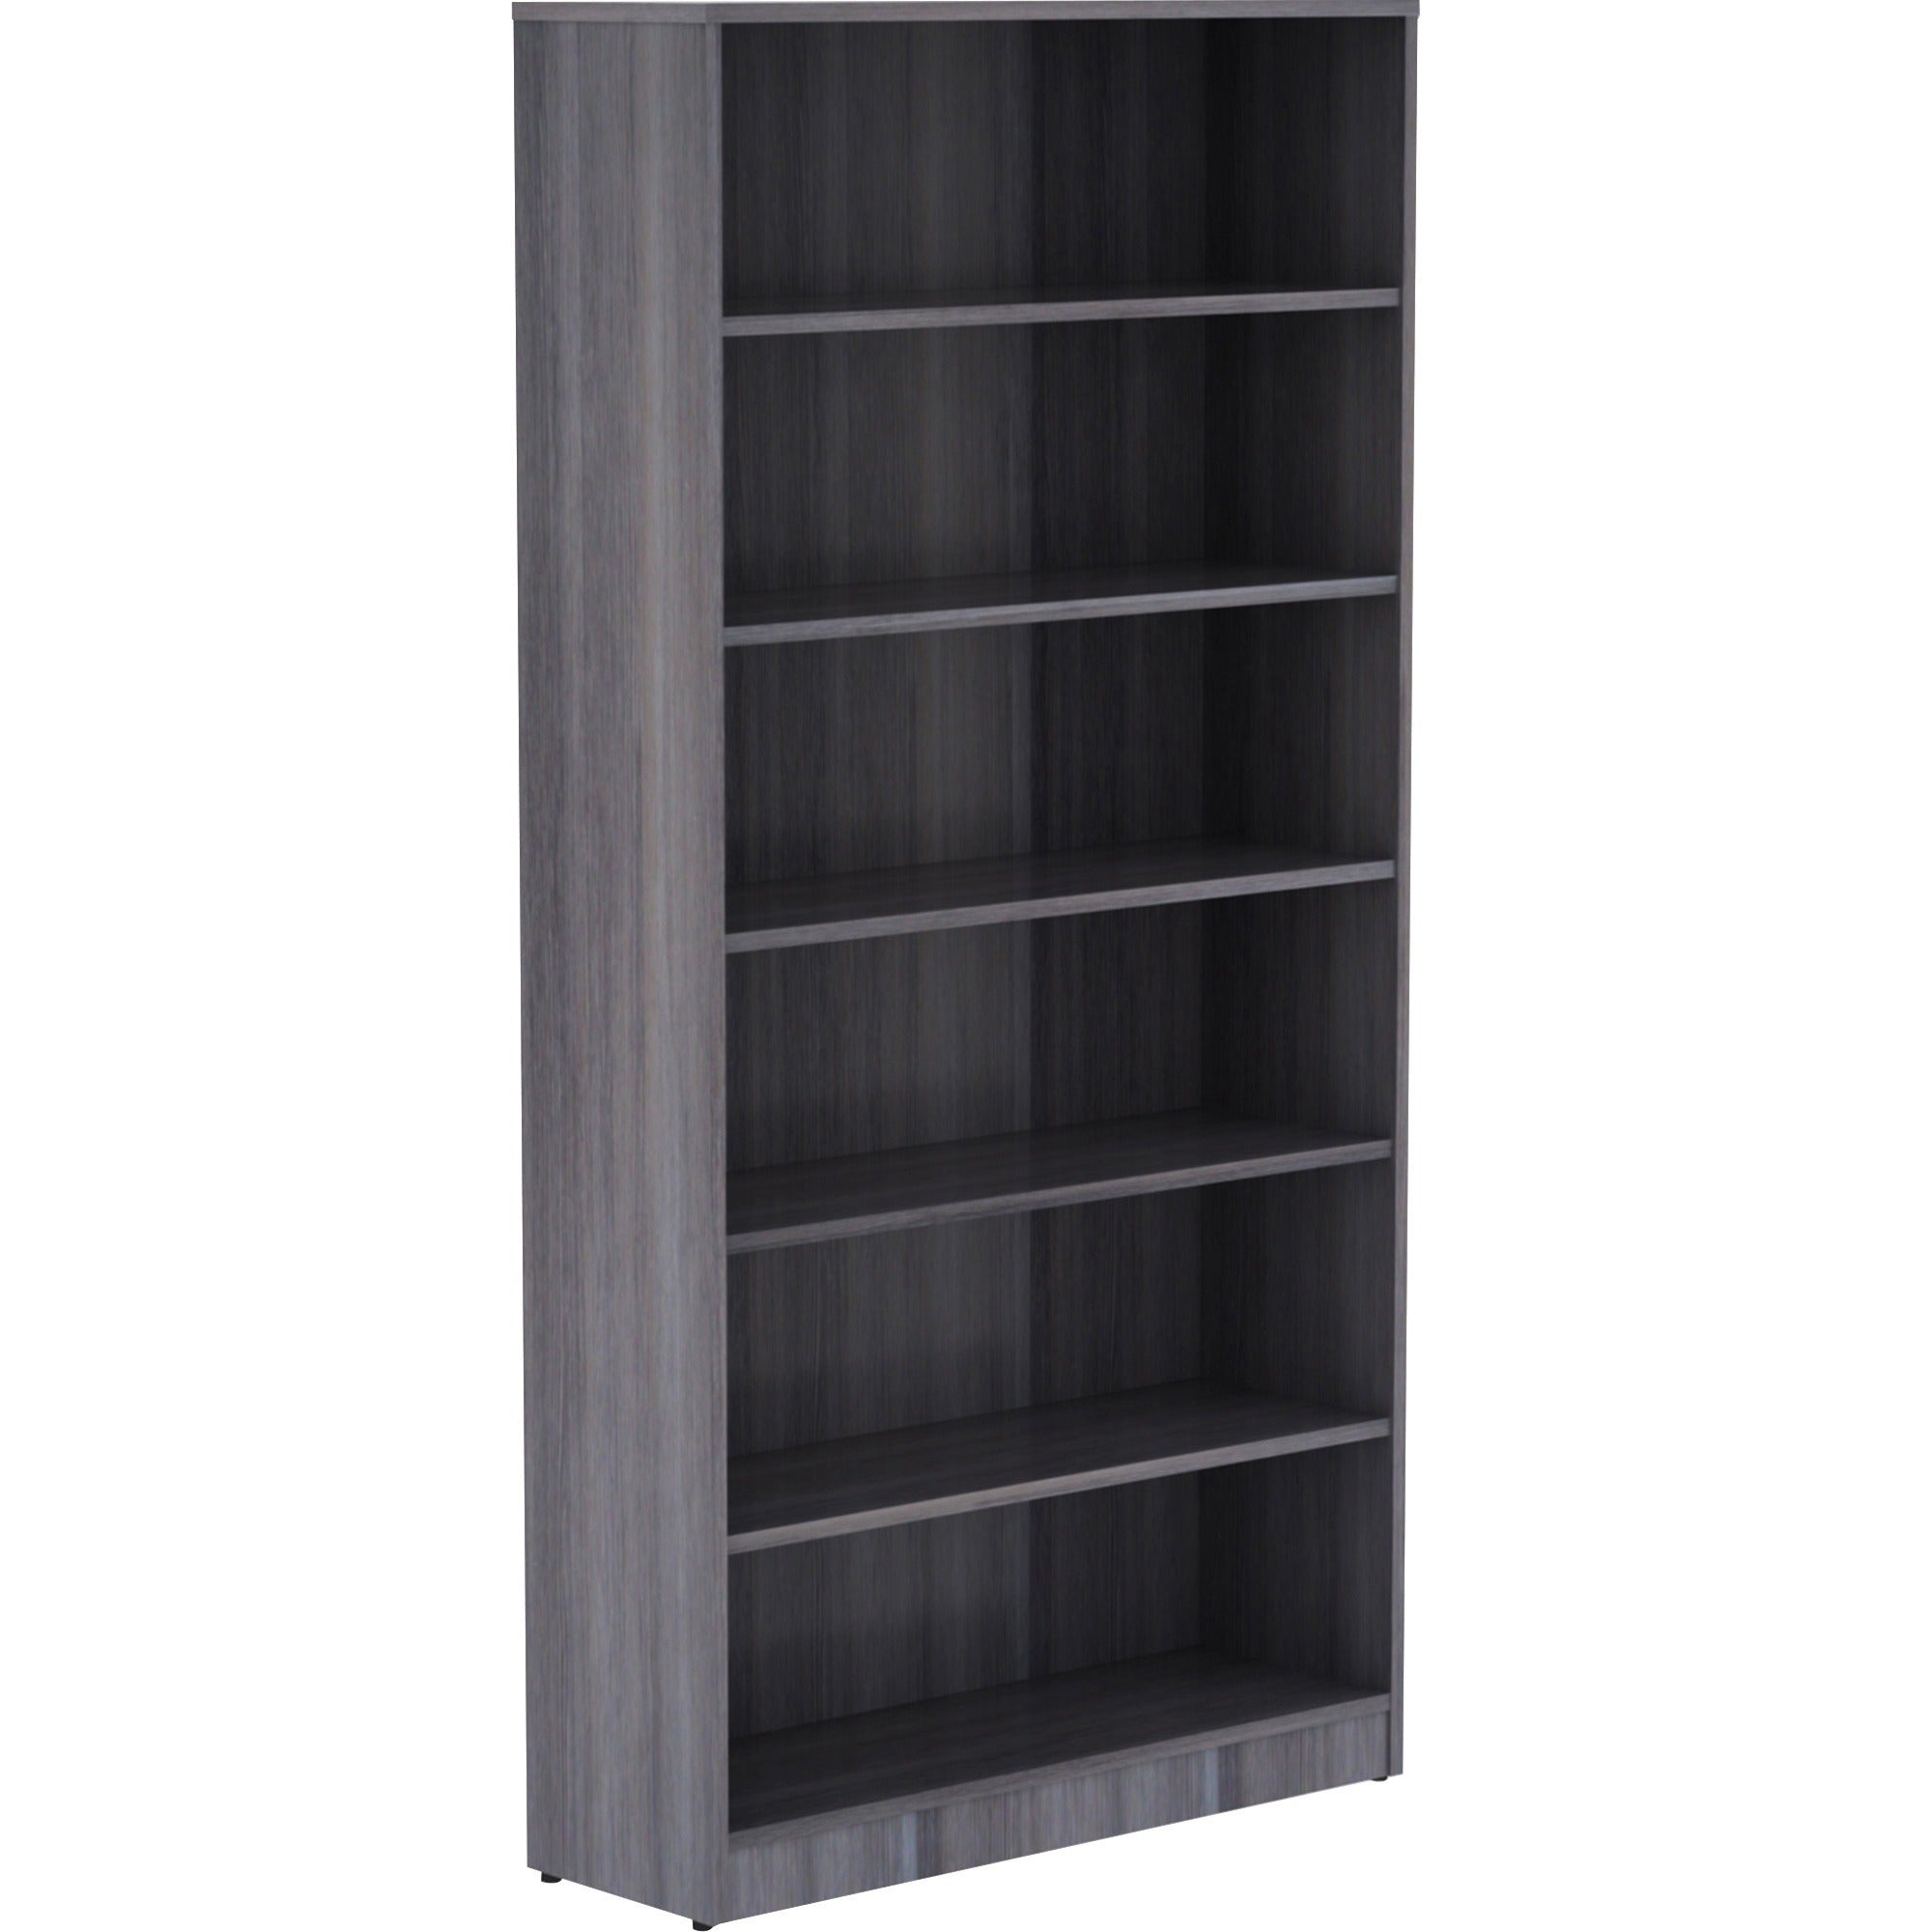 lorell-laminate-bookcase-6-shelfves-72-height-x-36-width-x-12-depth-thermally-fused-laminate-1-each_llr69565 - 1